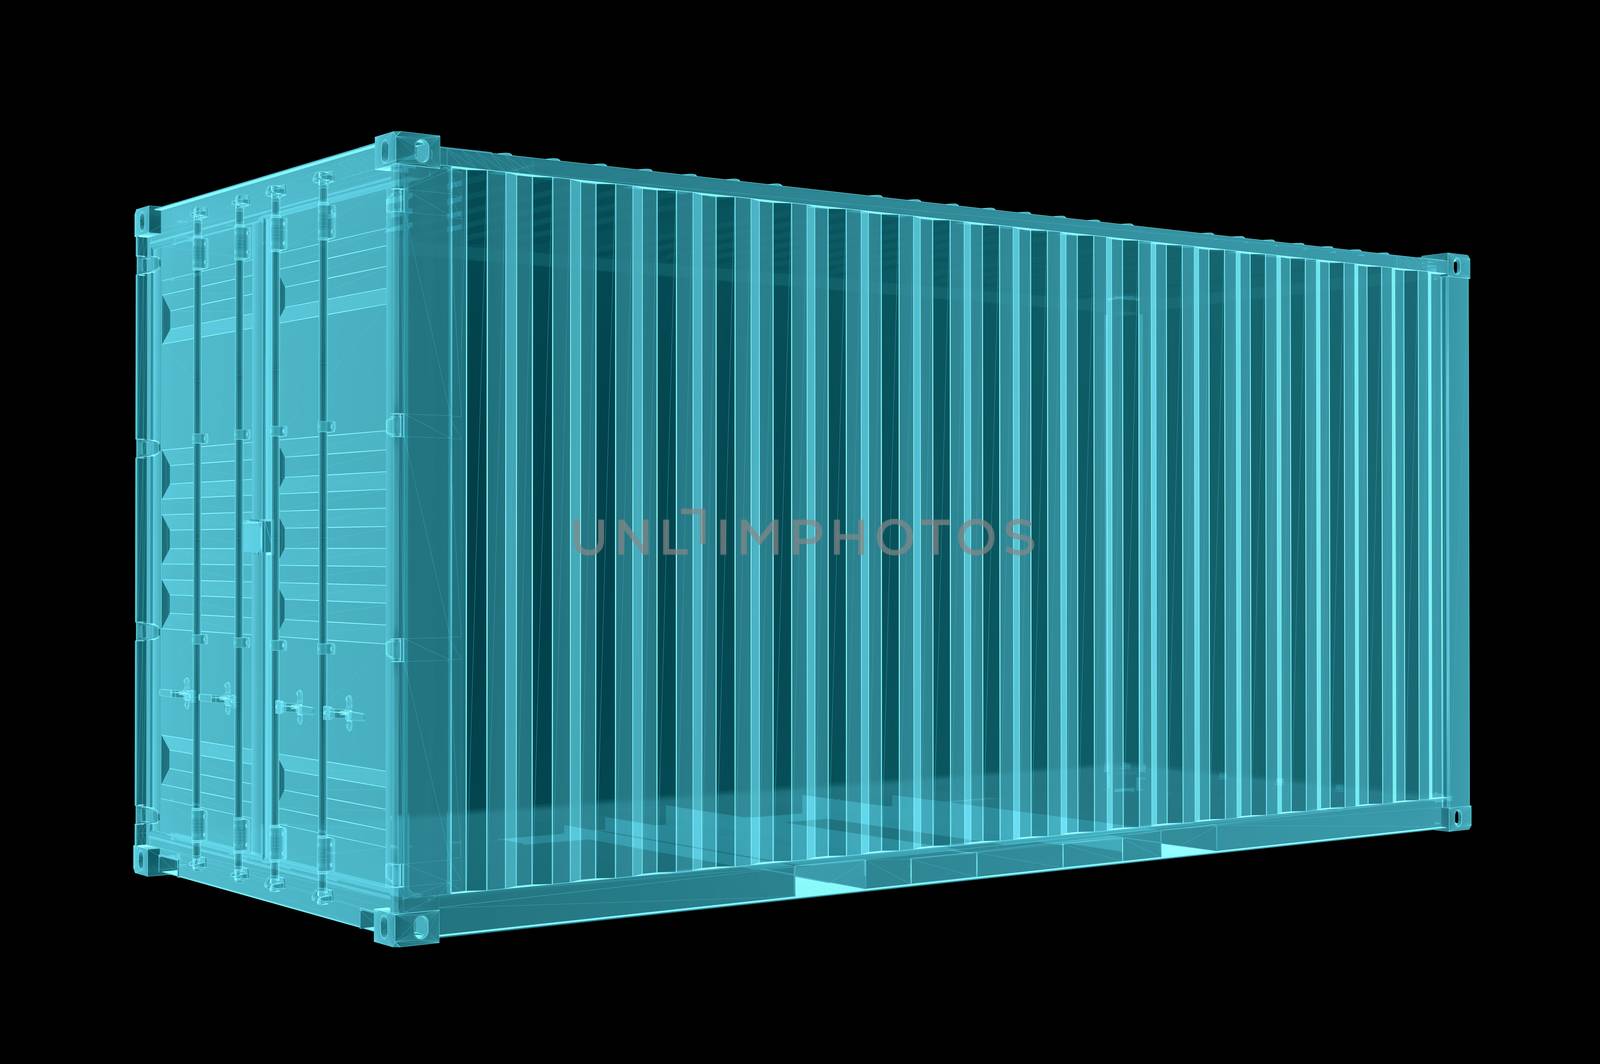 Shipping container. X-ray image, isolated on black. 3D Illustration